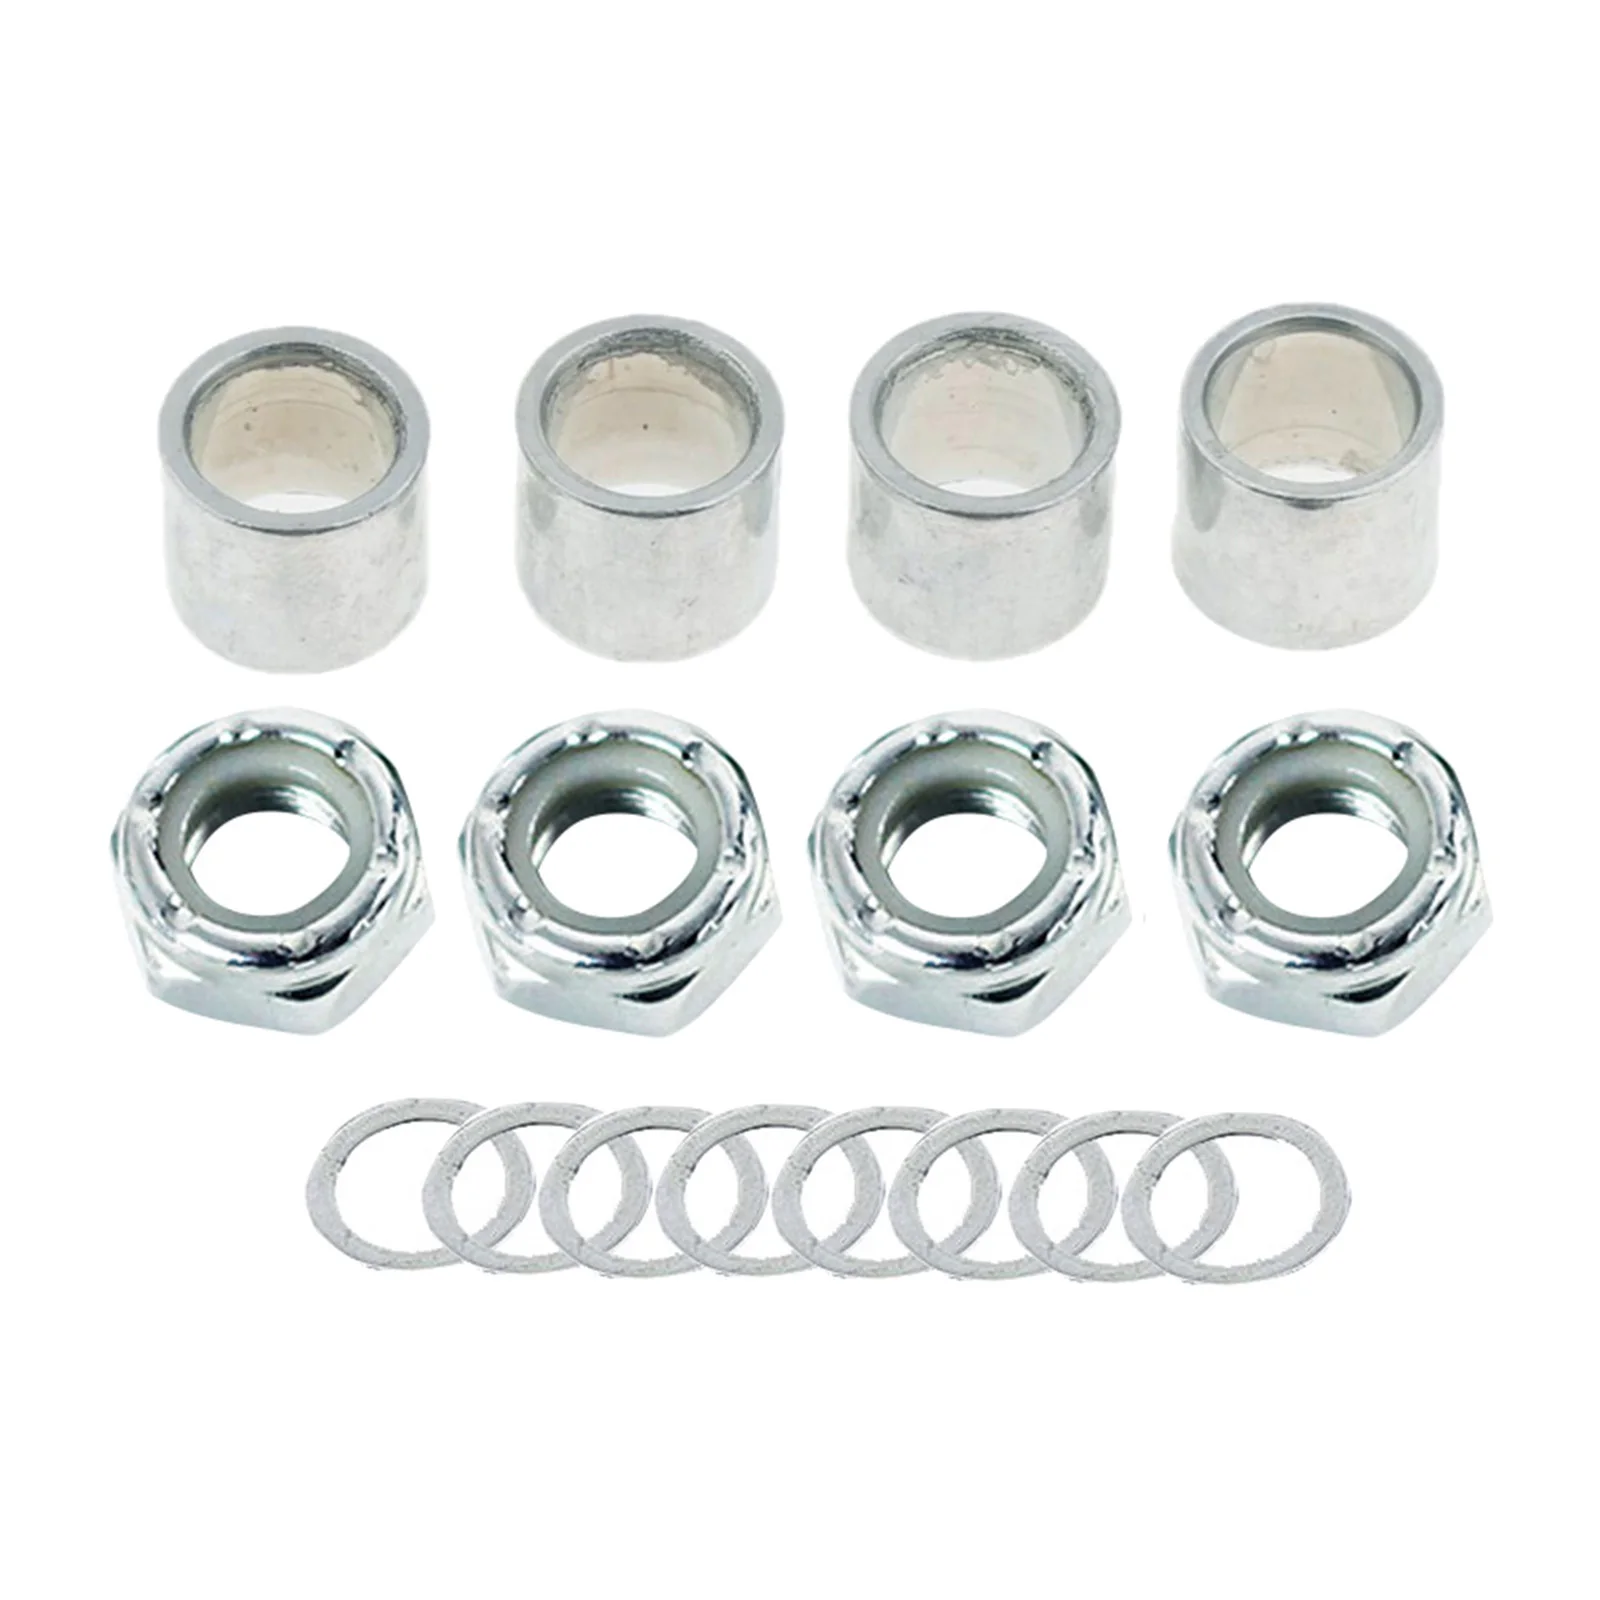 Skateboard Truck Speed Kits Axle Speed Washers + Screw Nuts + Spacers for Long Board Cruiser Scooter Parts